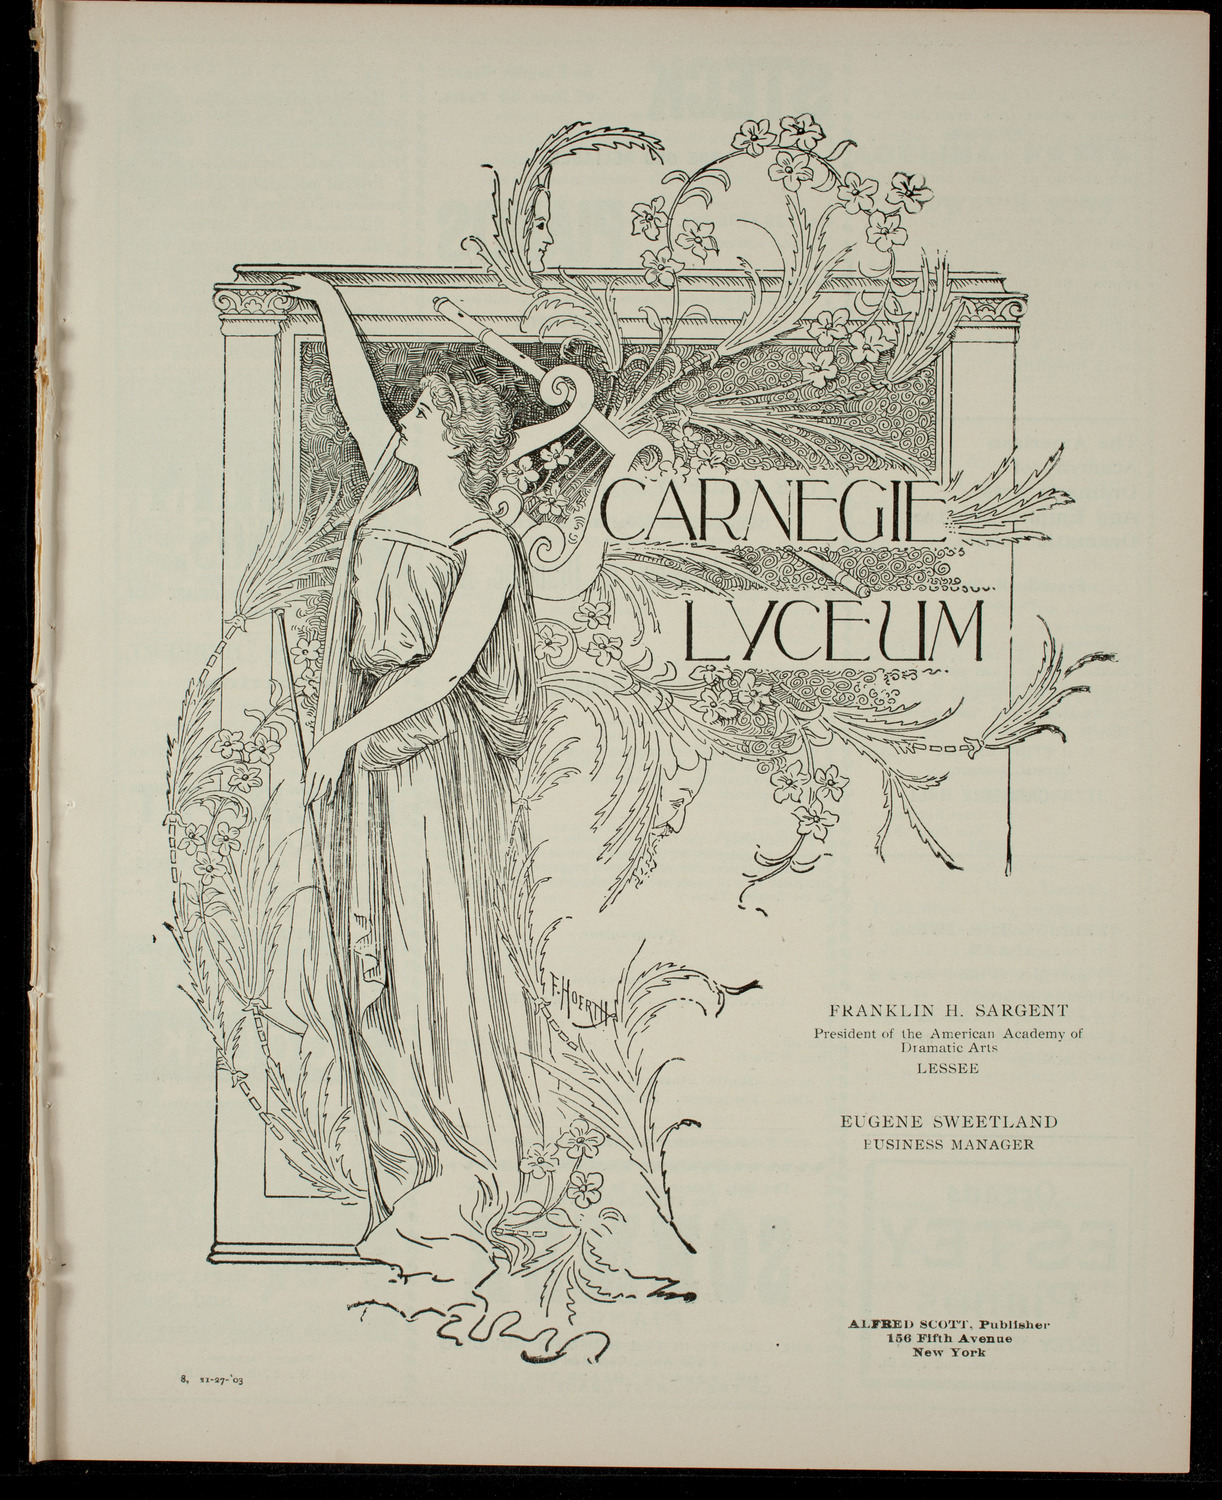 Academy Stock Company of the American Academy of Dramatic Arts/Empire Theatre Dramatic School, November 27, 1903, program page 1